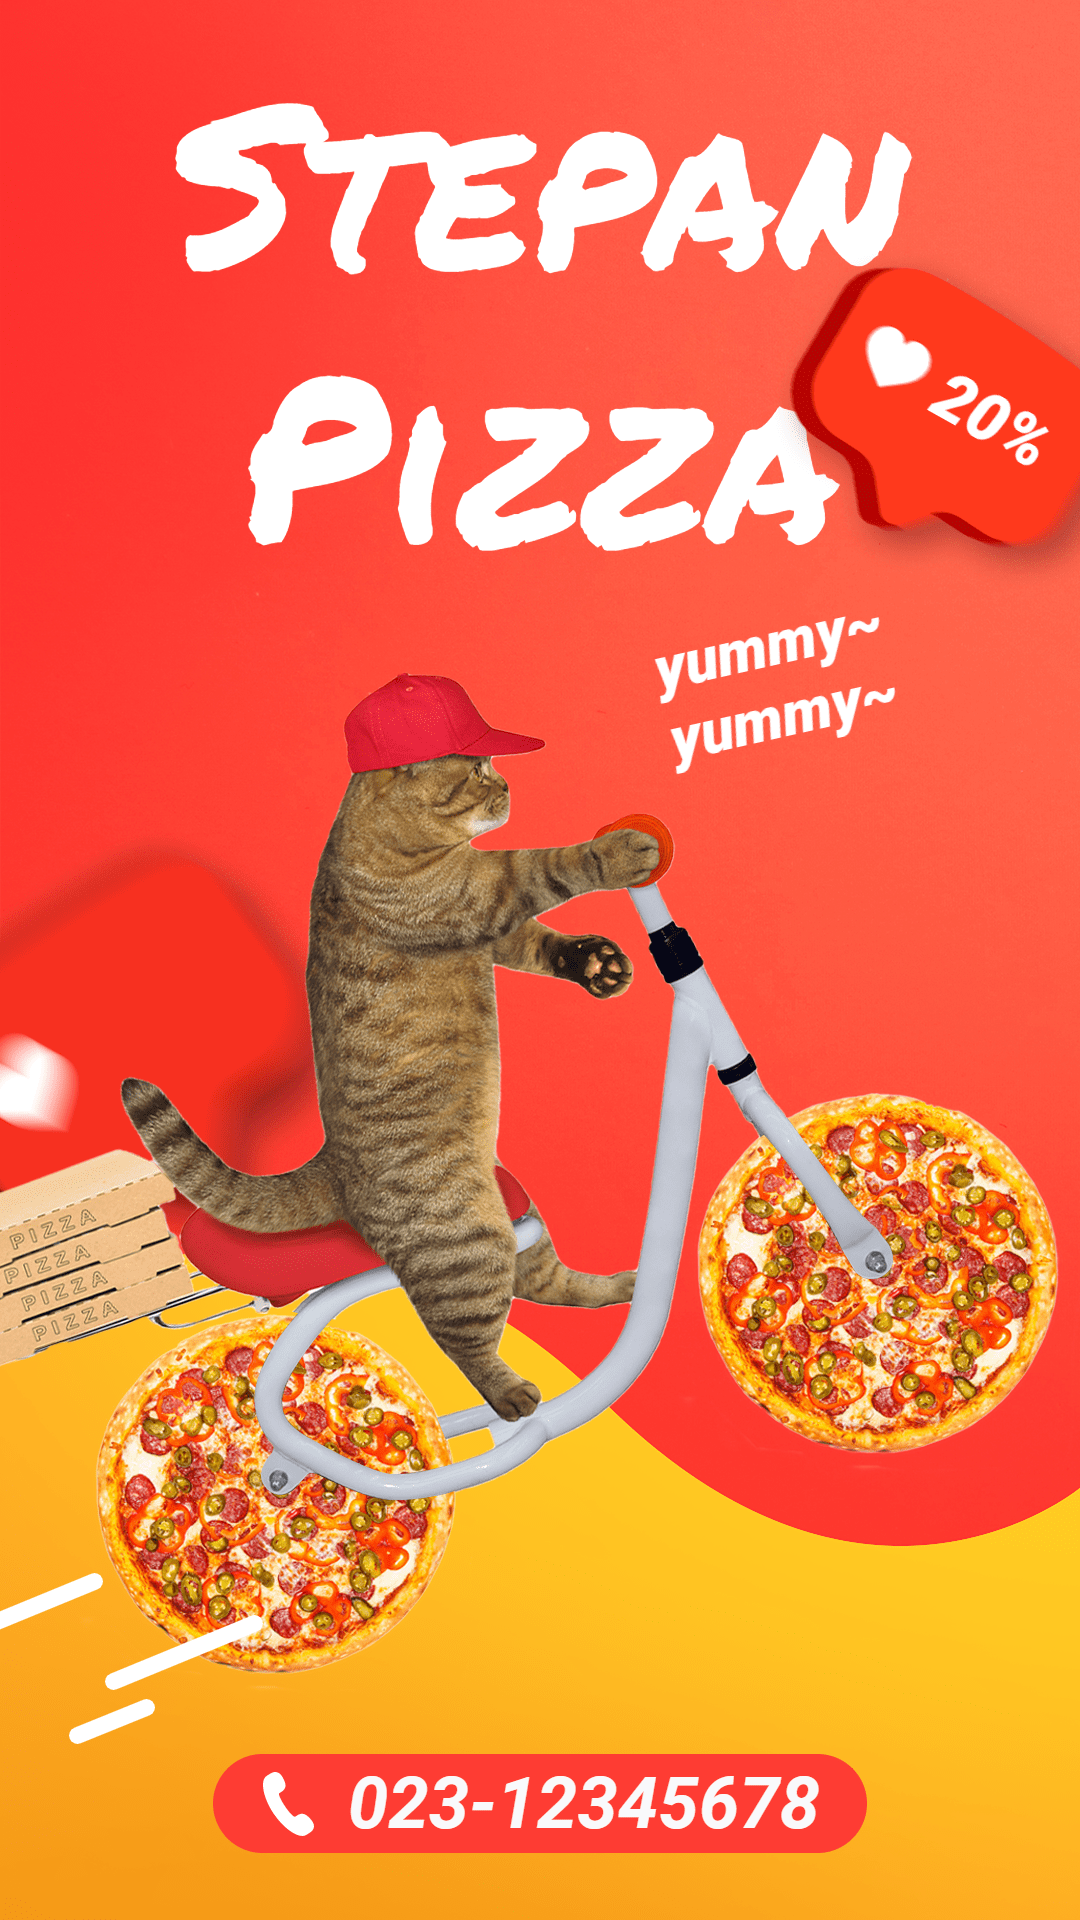 Pizza Fast Food Delivery Fun Marketing Cutout Ecommerce Story预览效果